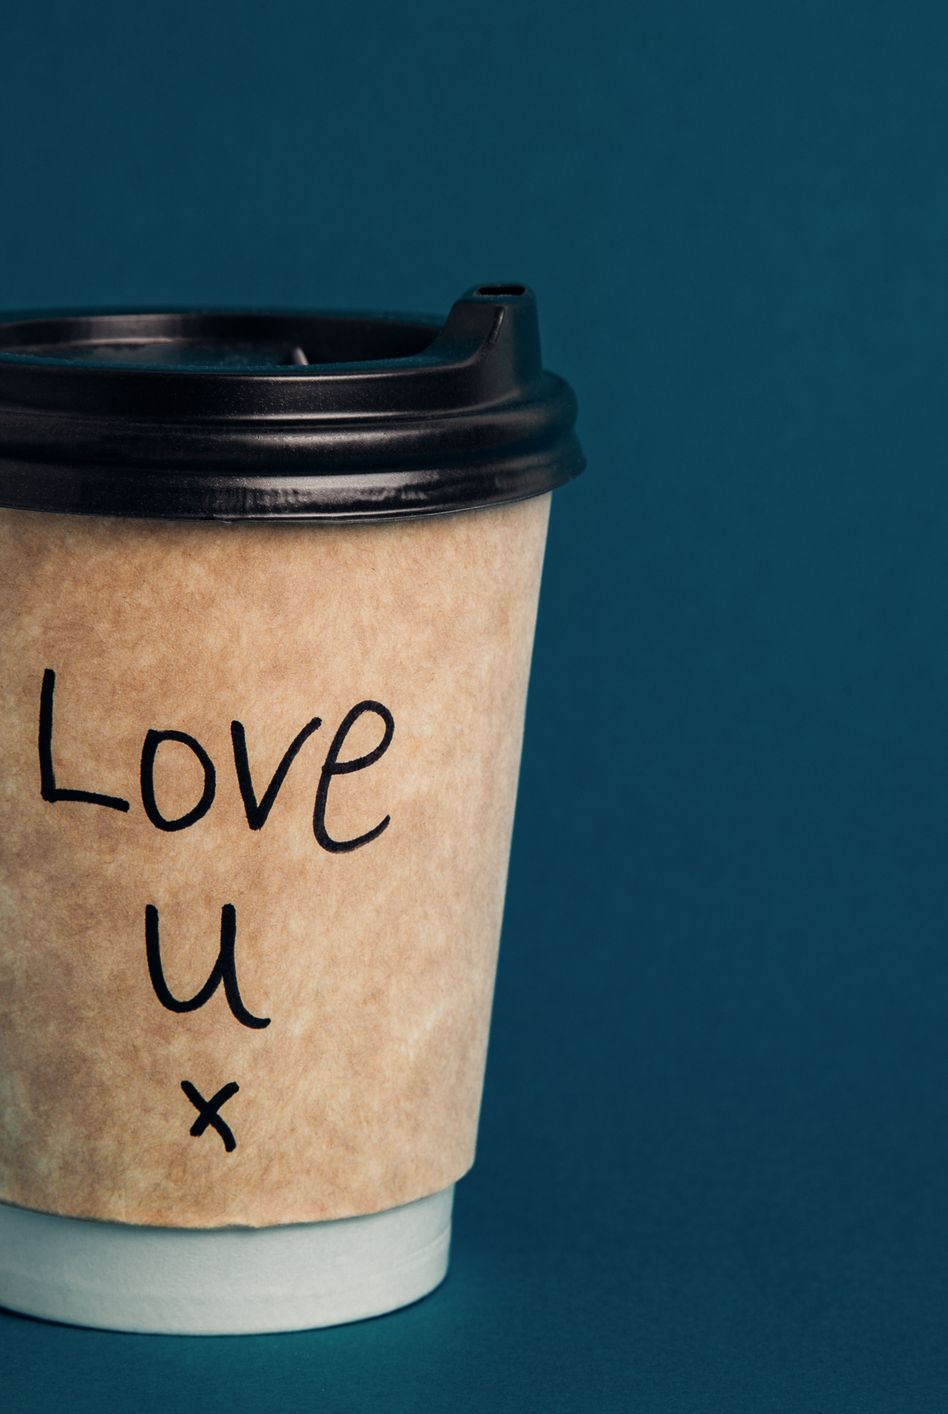 love you message on a cup